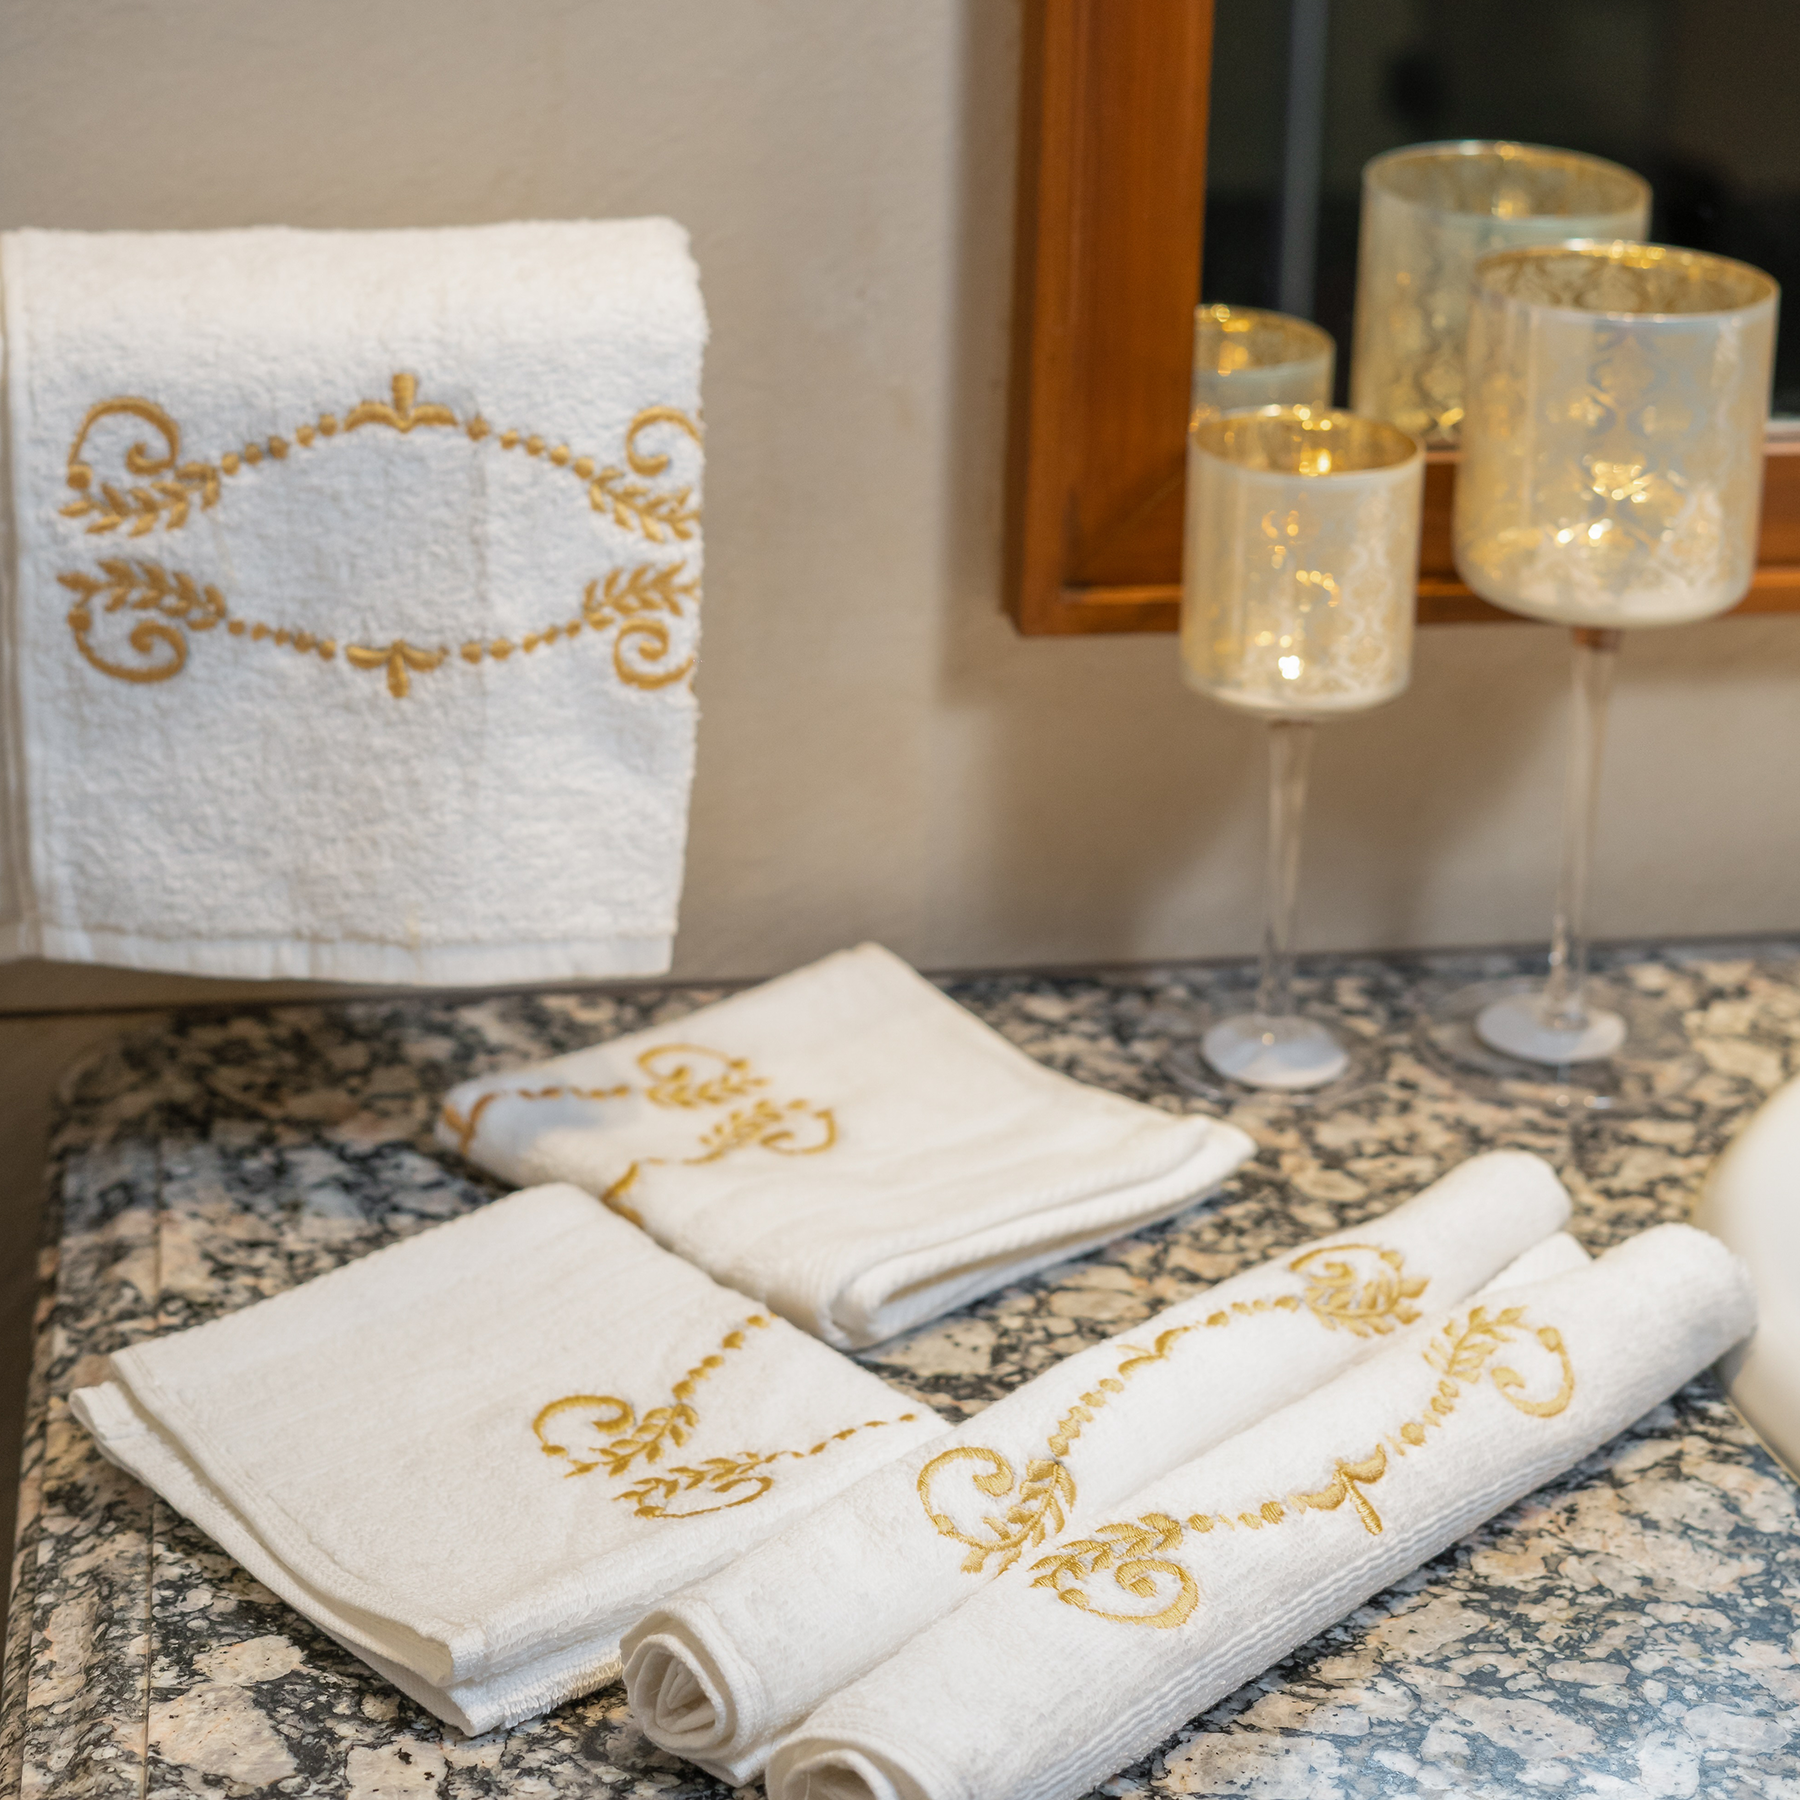 The Luxelife Golden Embroidered Hand Towels